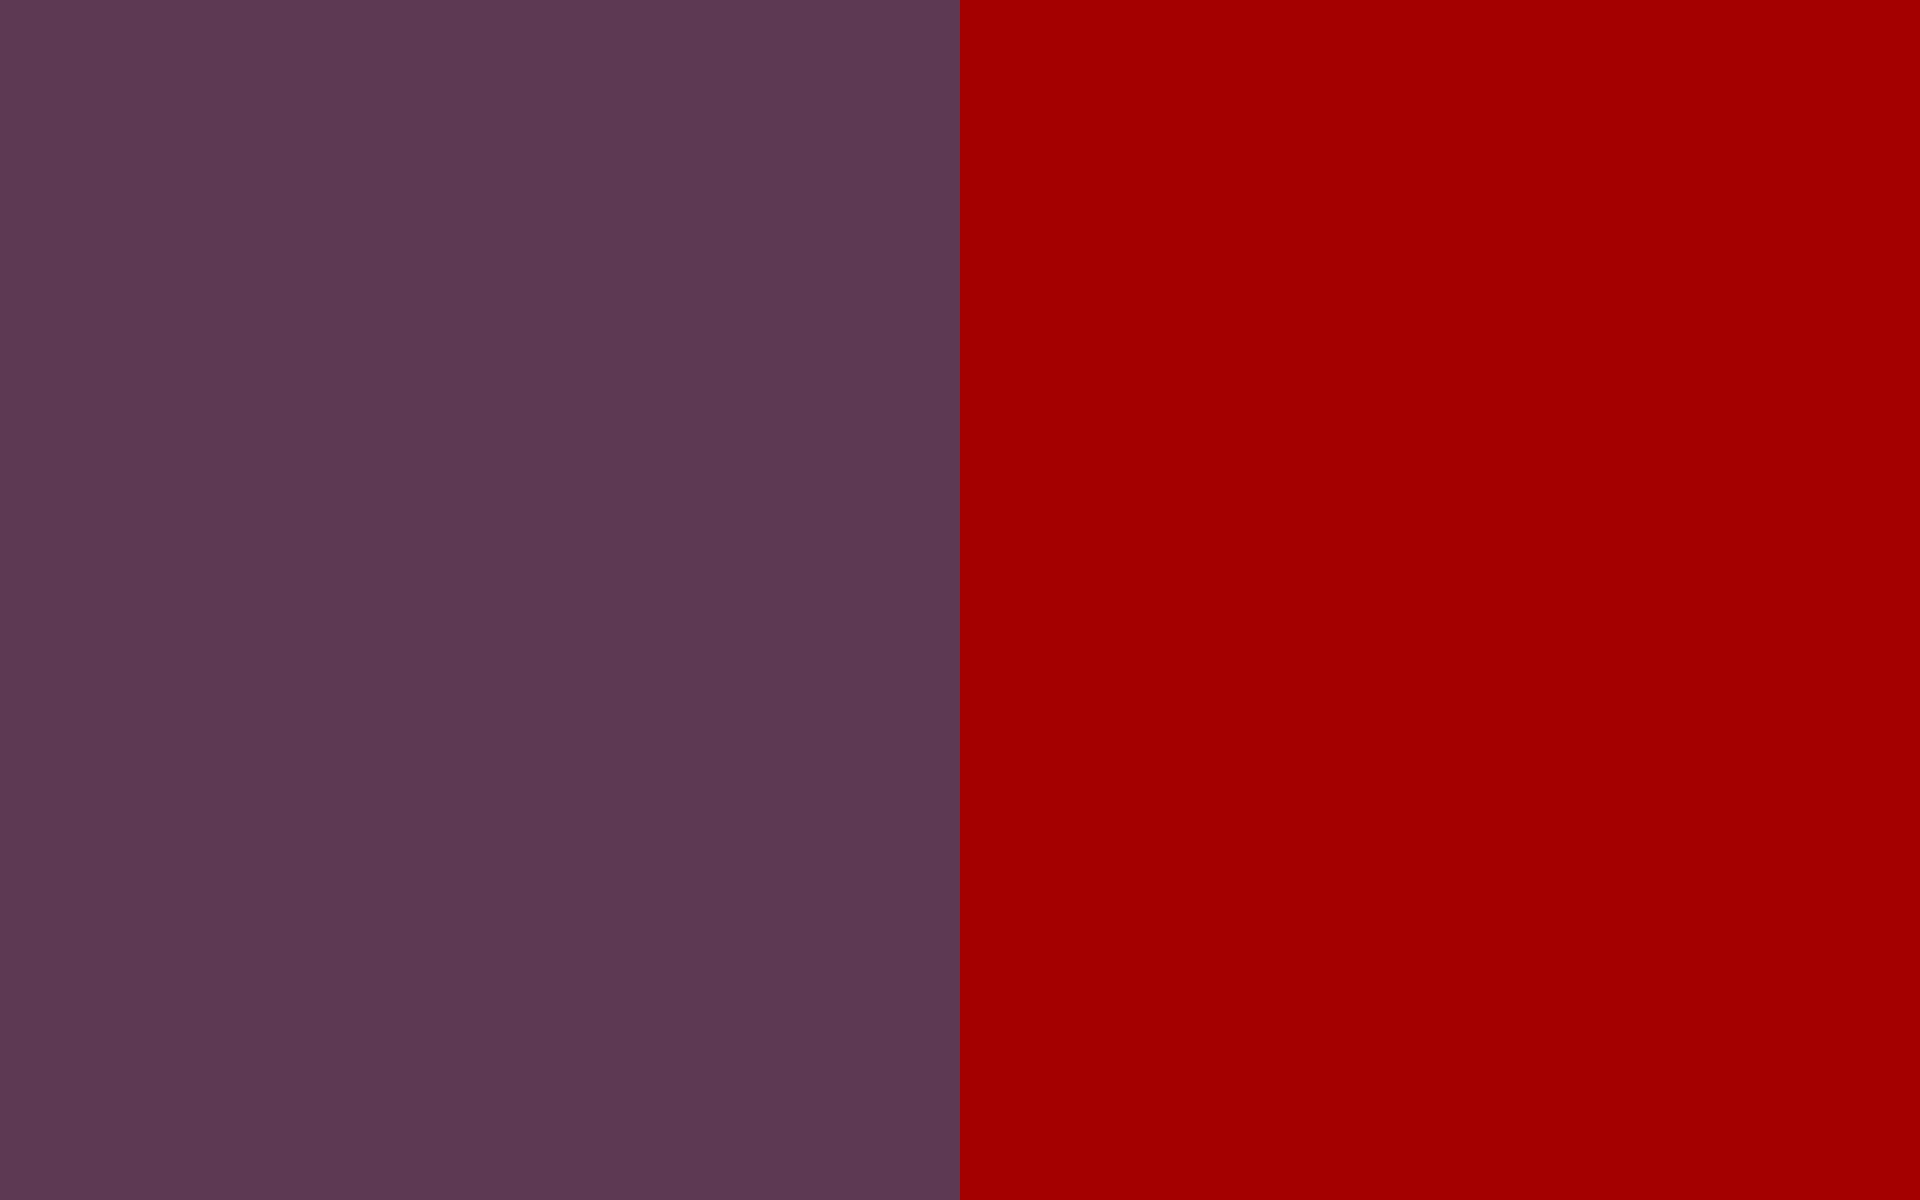 Dark Byzantium And Candy Apple Red Two Color Background